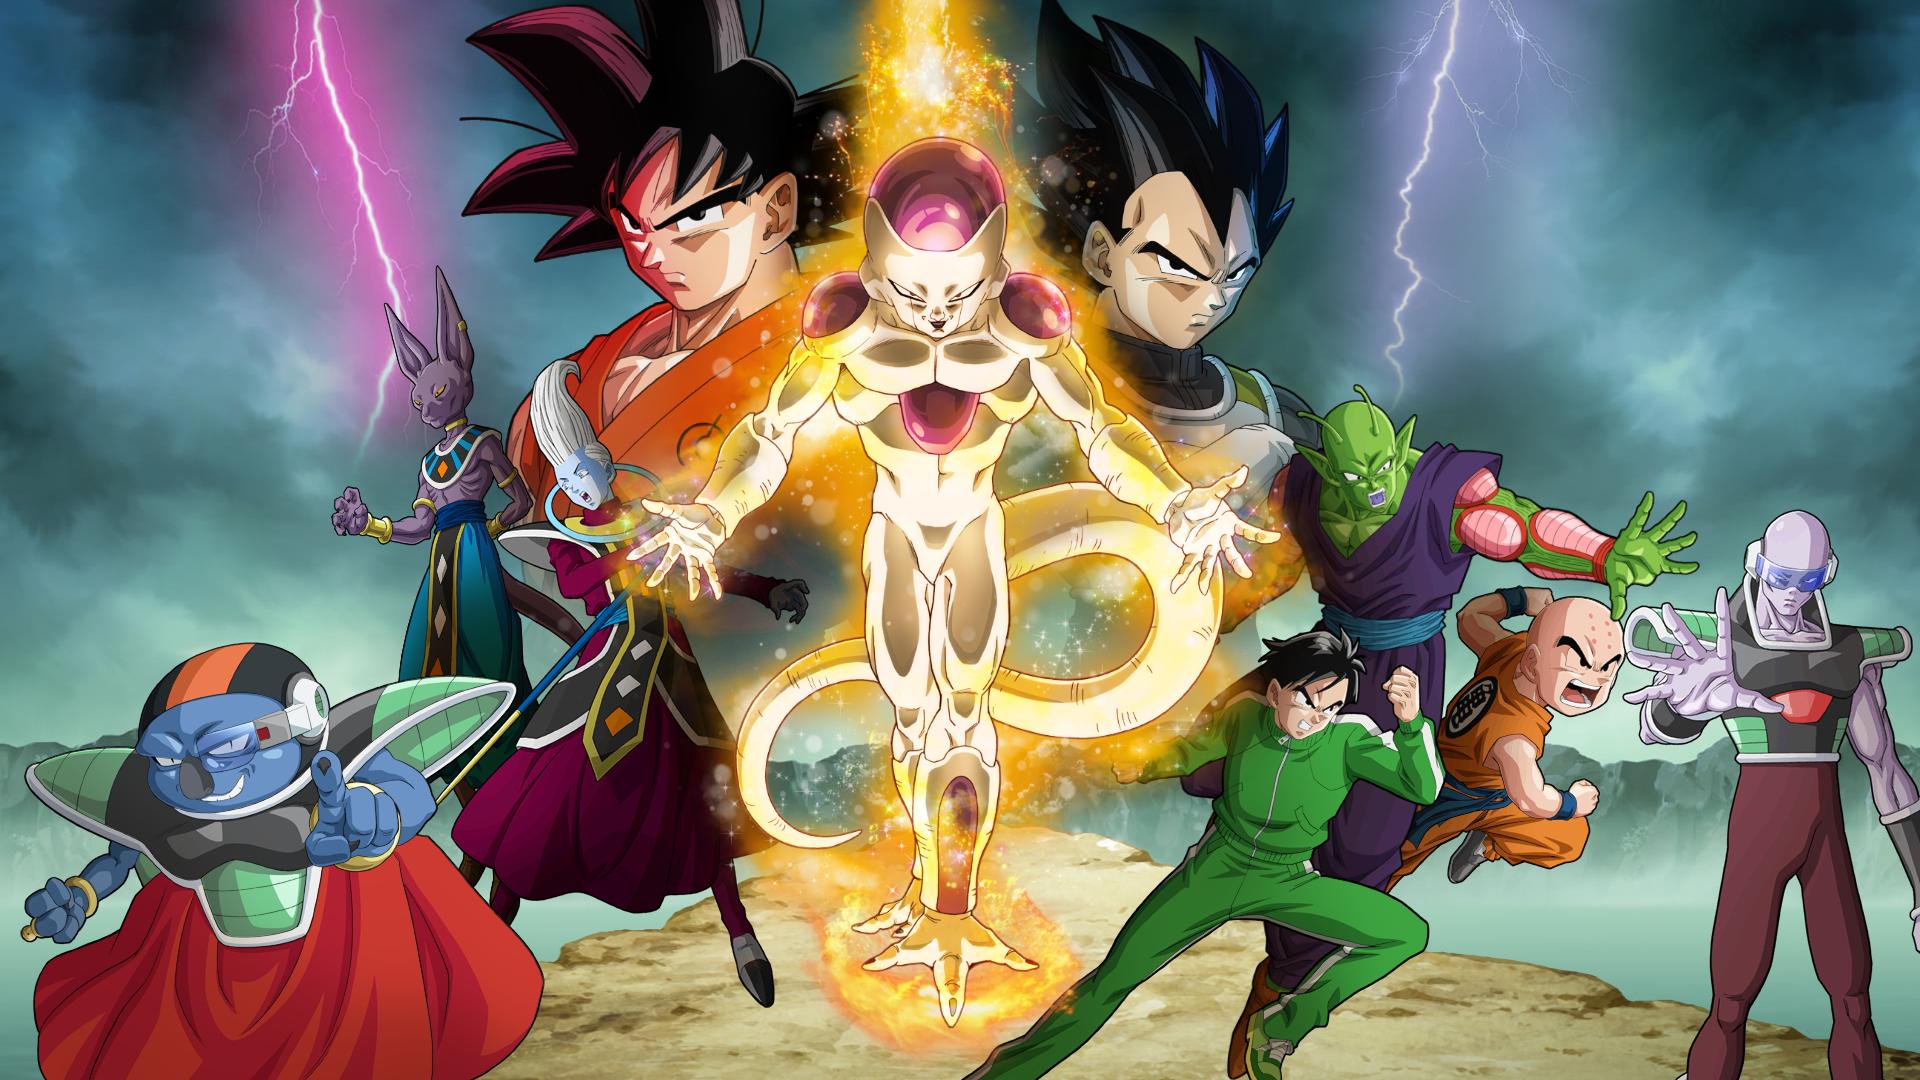 DRAGON BALL: SPARKING! ZERO is the earth-shaking sequel bringing